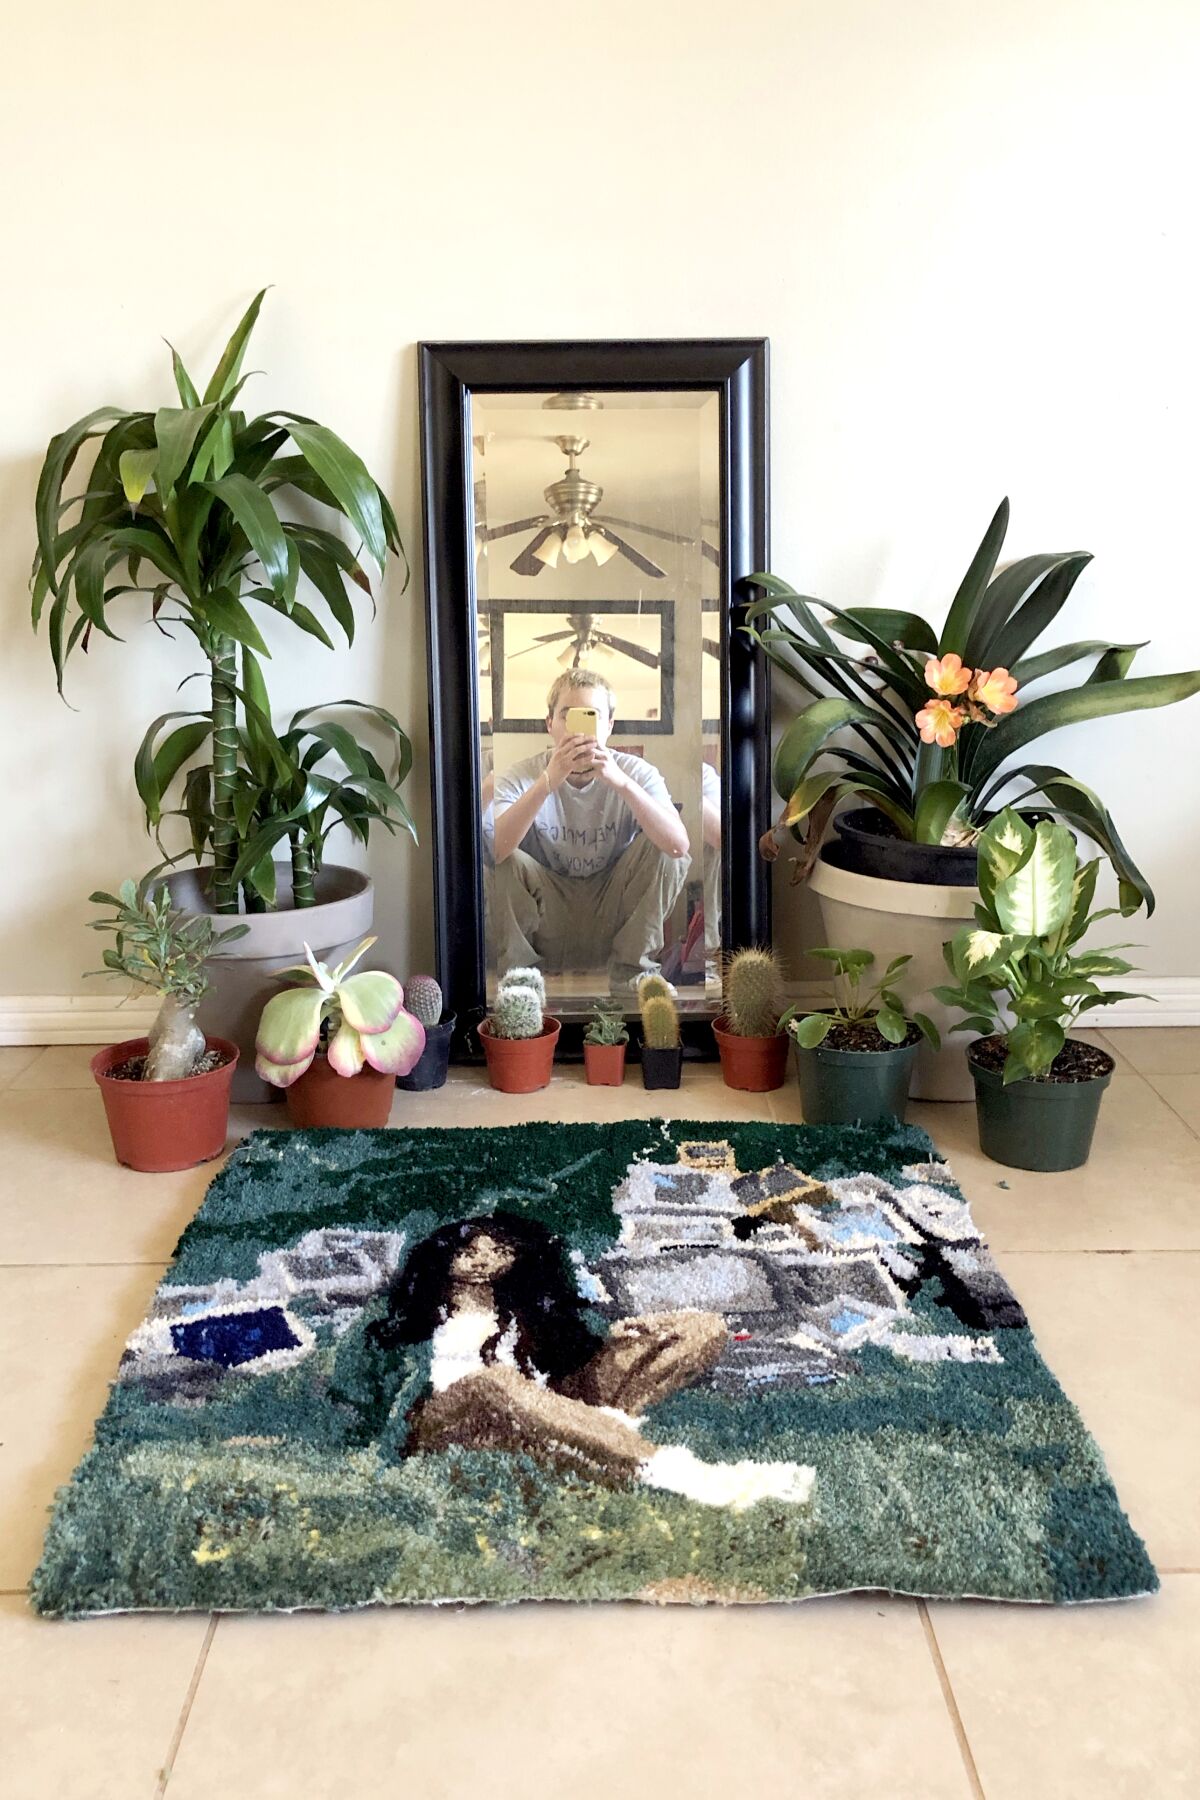 Oscar Morales, reflected in a mirror, with the rug he made based on SZA's "Ctrl" album cover. 